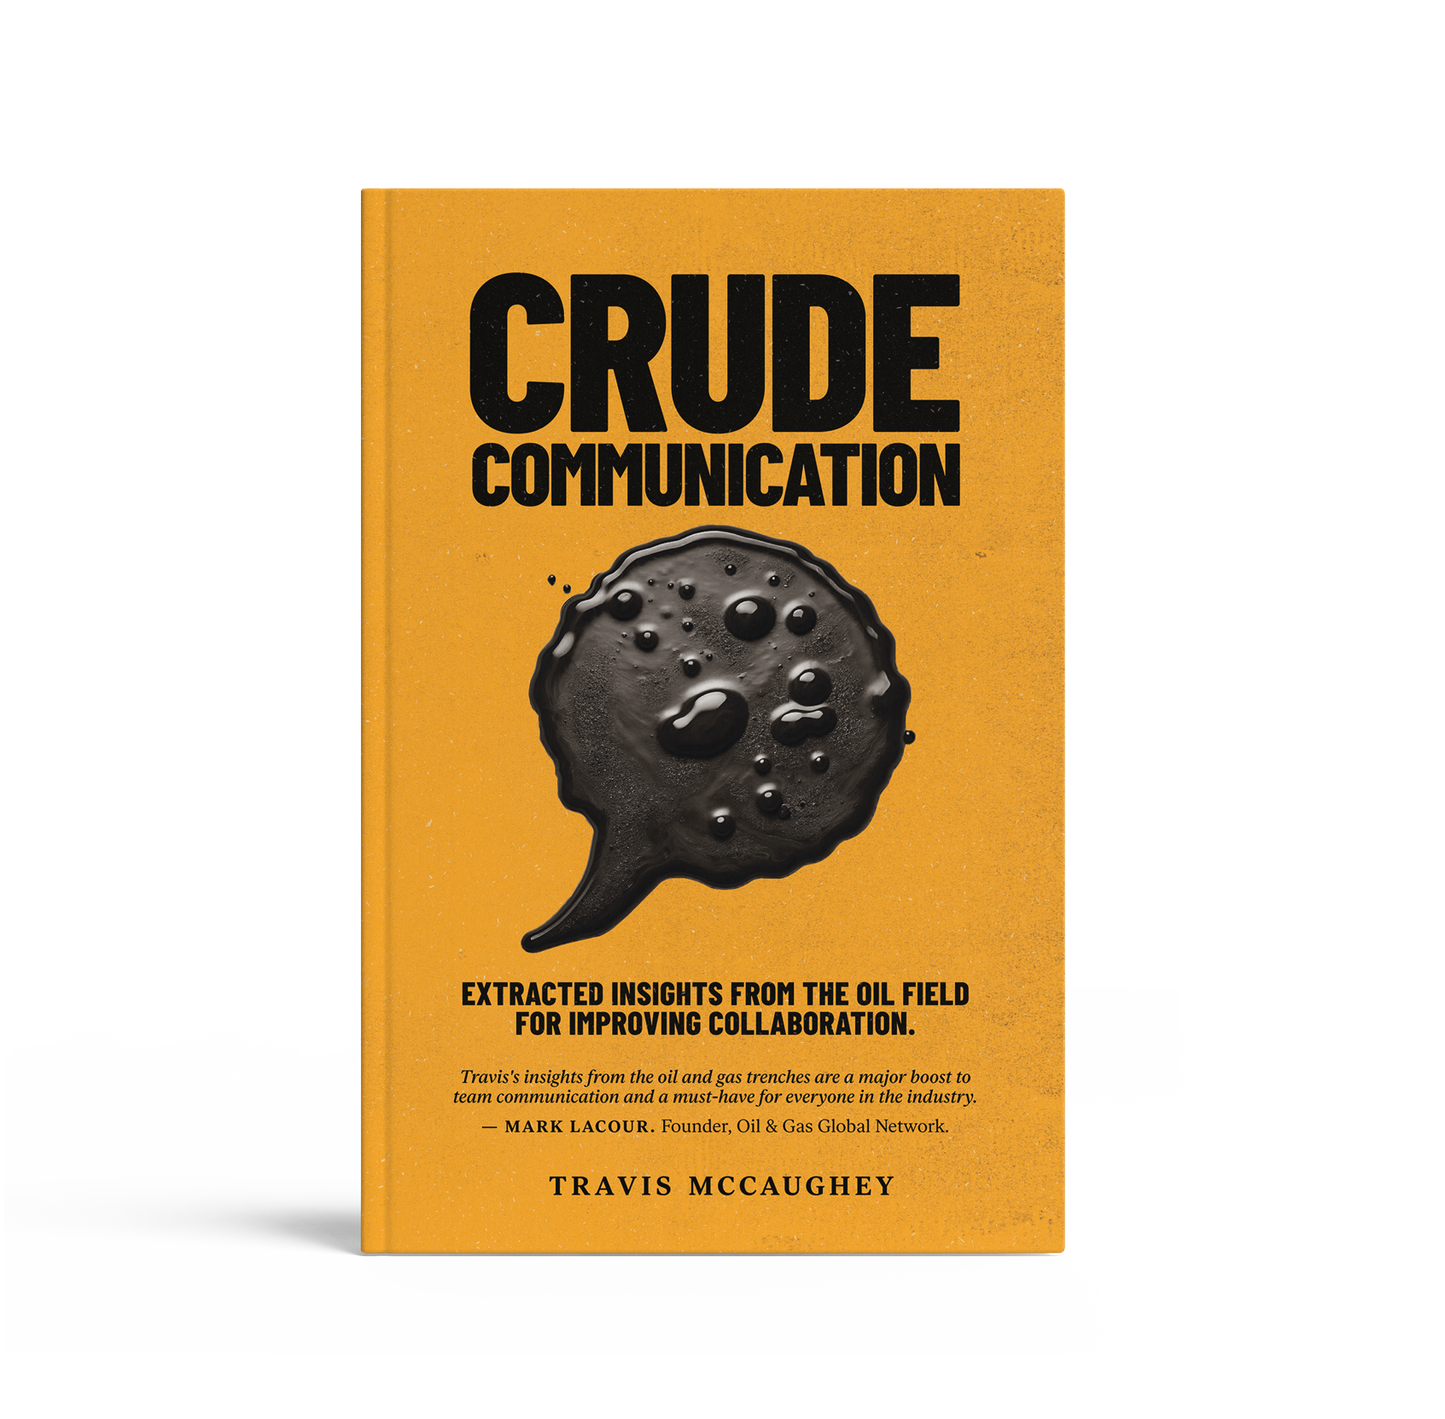 Crude Communication: Extracted Insights From The Oil Field For Improving Collaboration - PAPERBACK